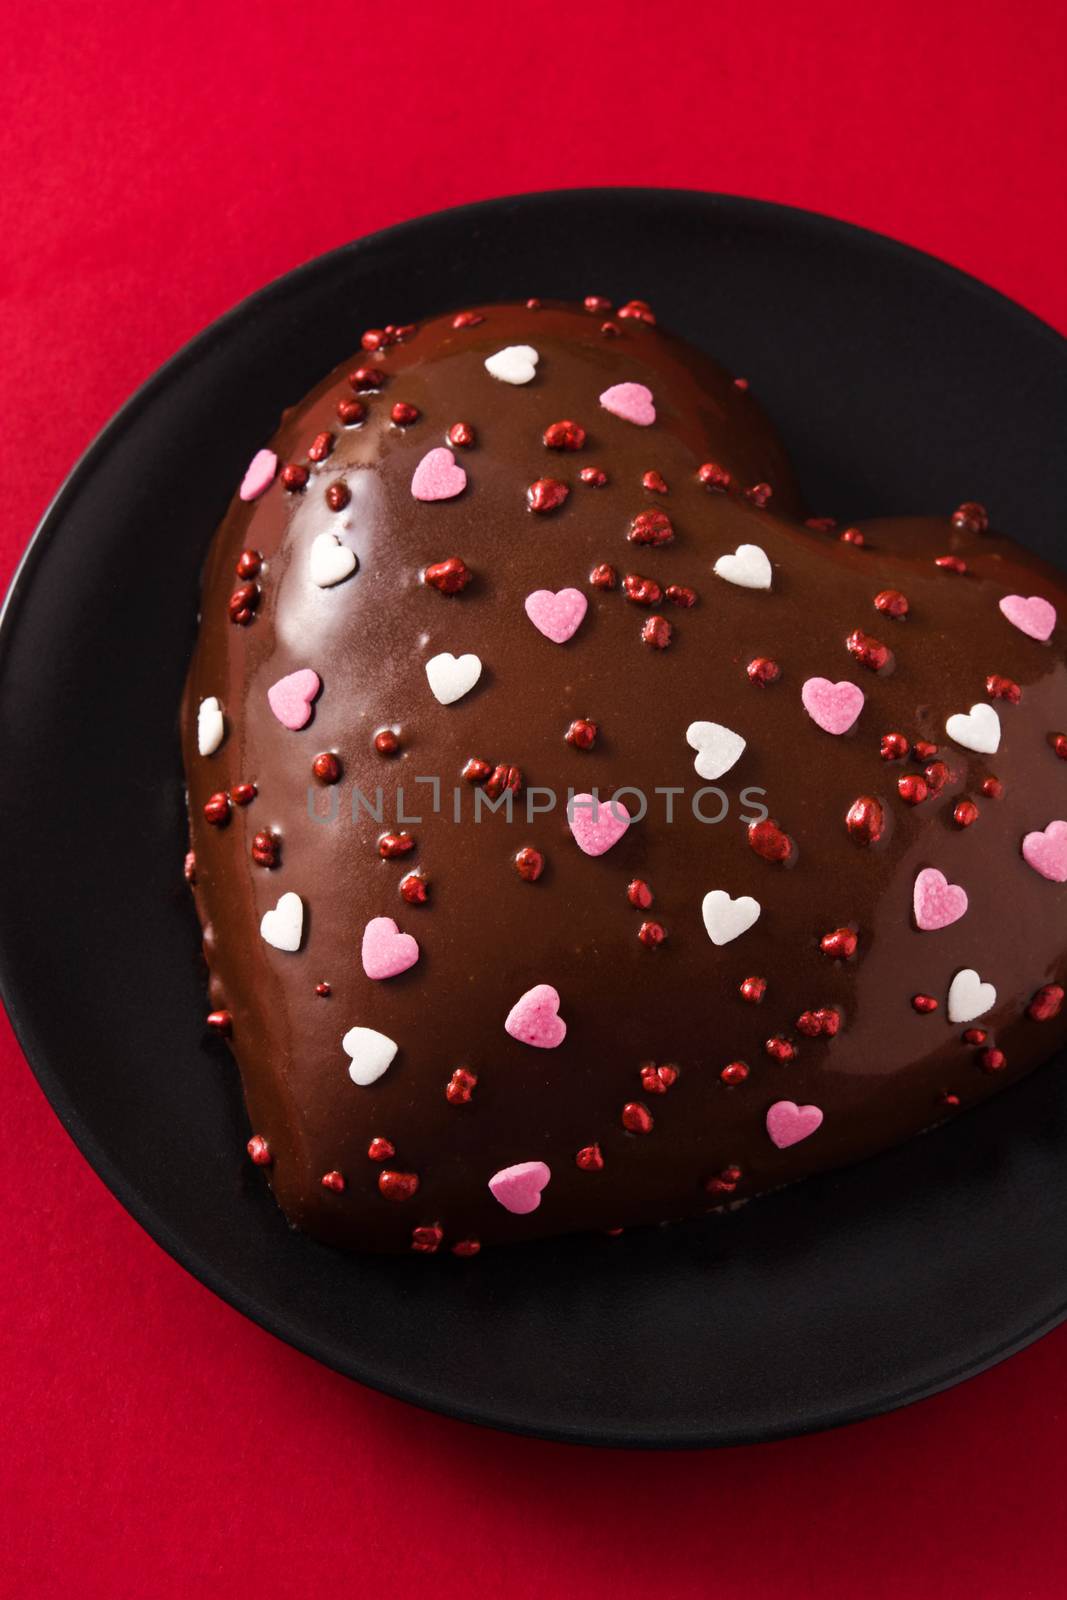 Heart shaped cake and red rose for Valentine's Day or mother's day on red background